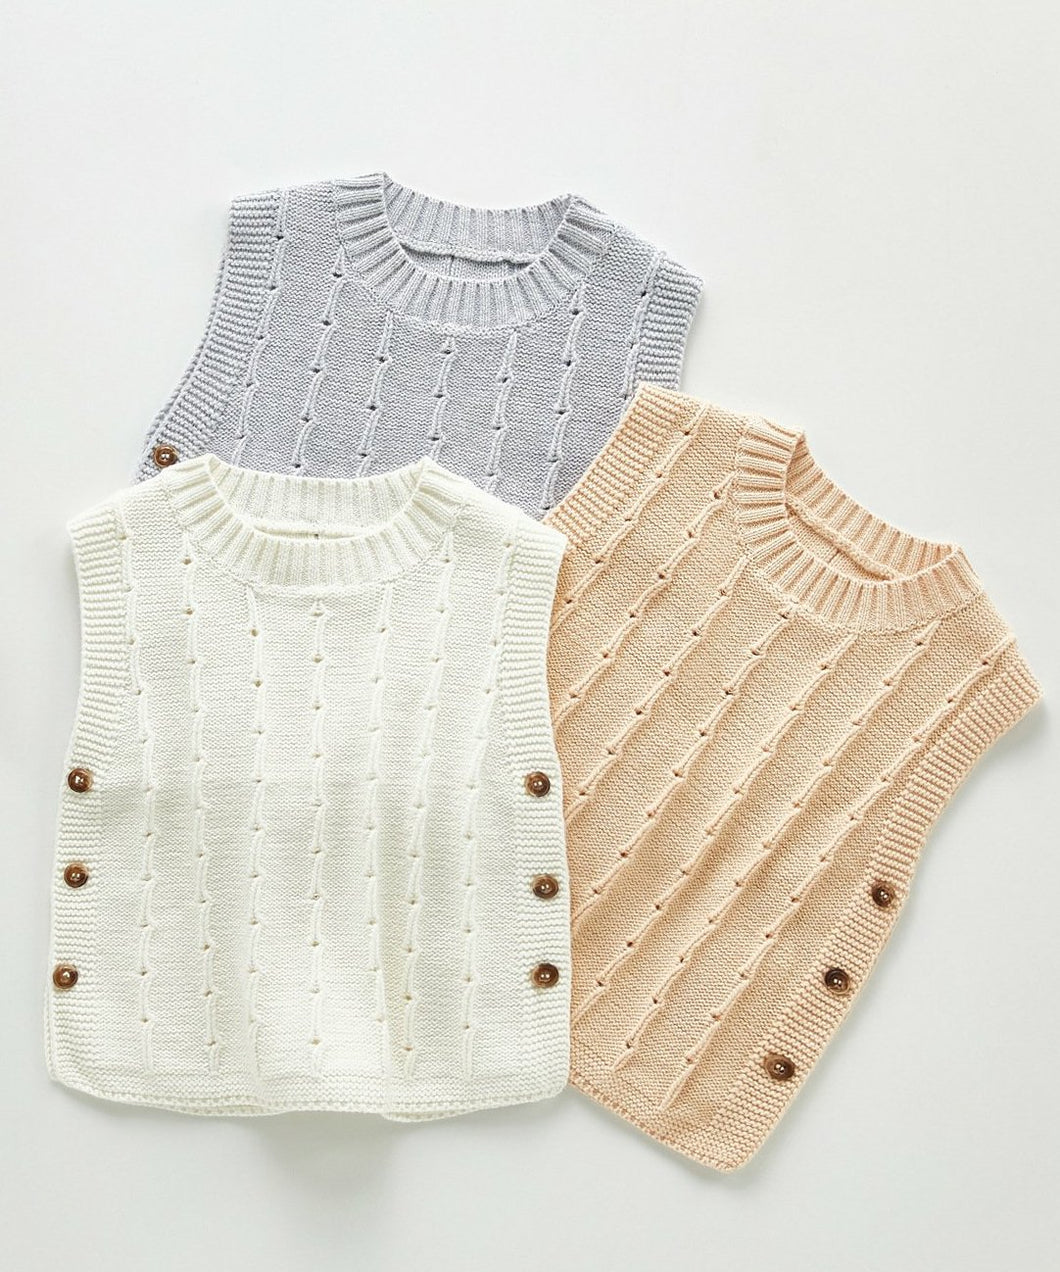 Infant Knitted Sweater Vest - Unisex